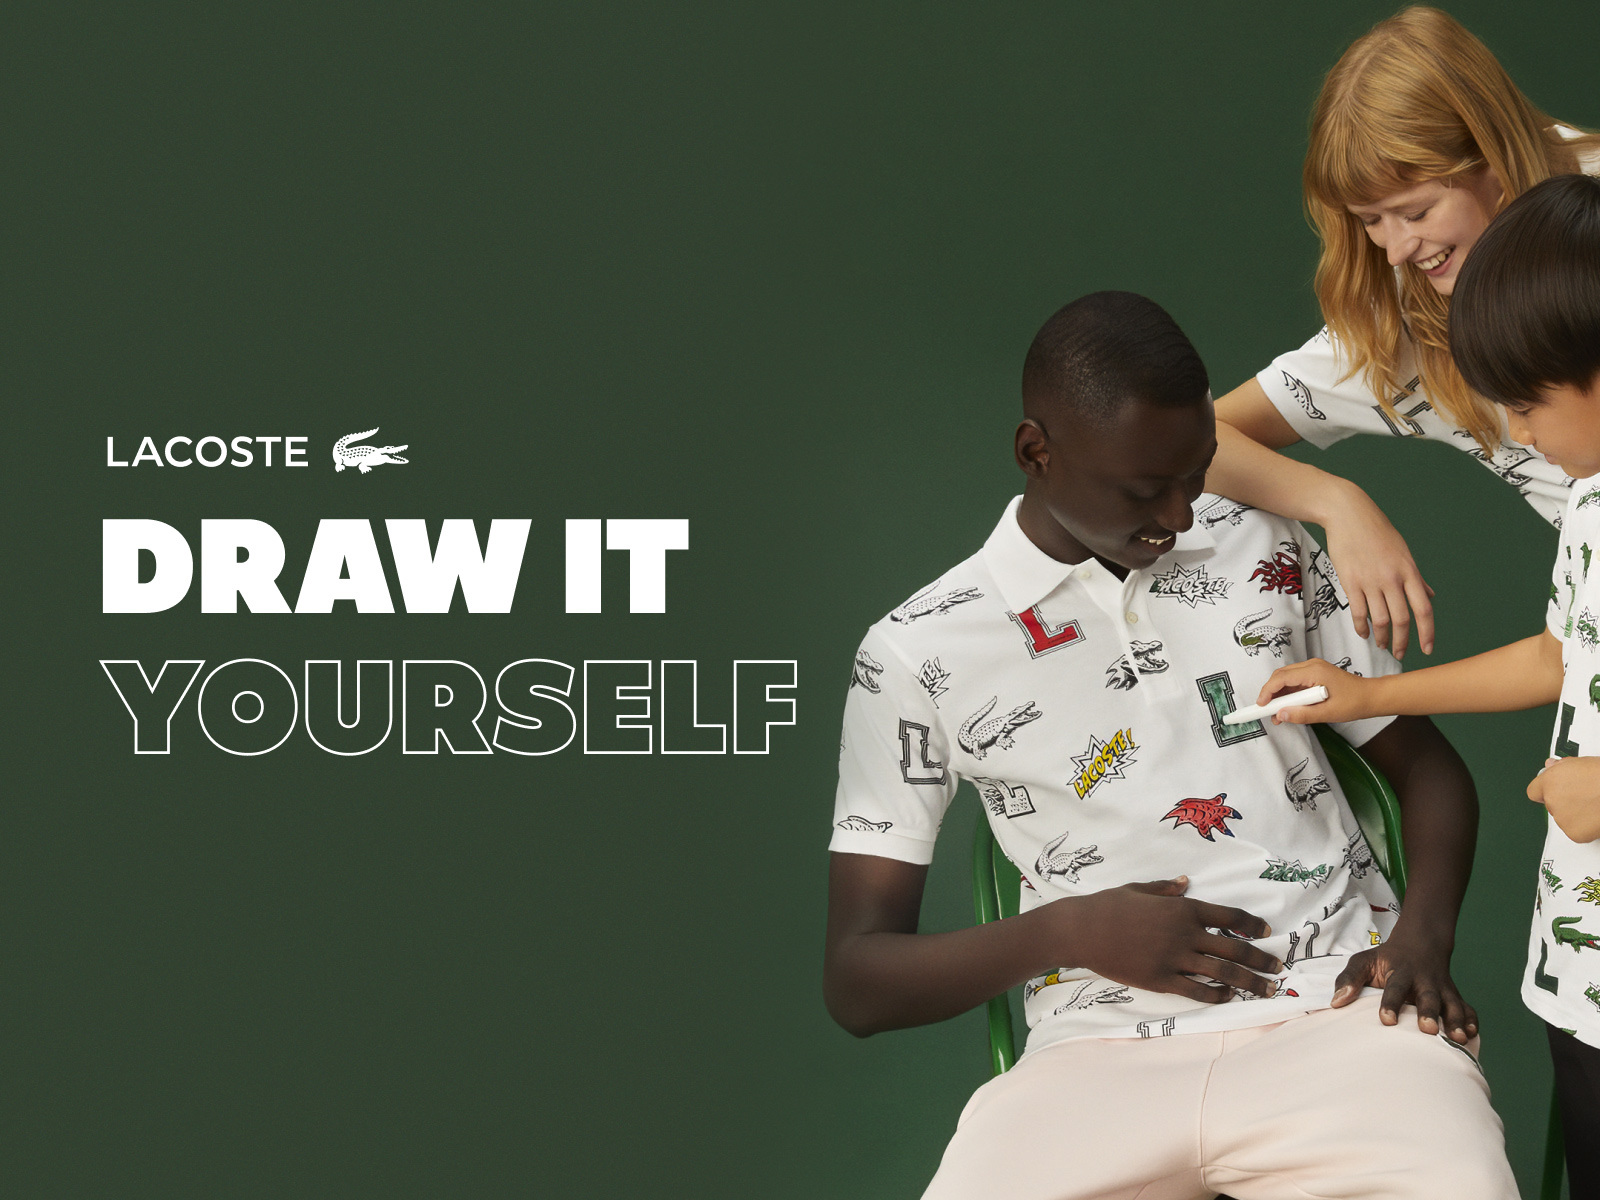 Lacoste Draw it yourself Campaing